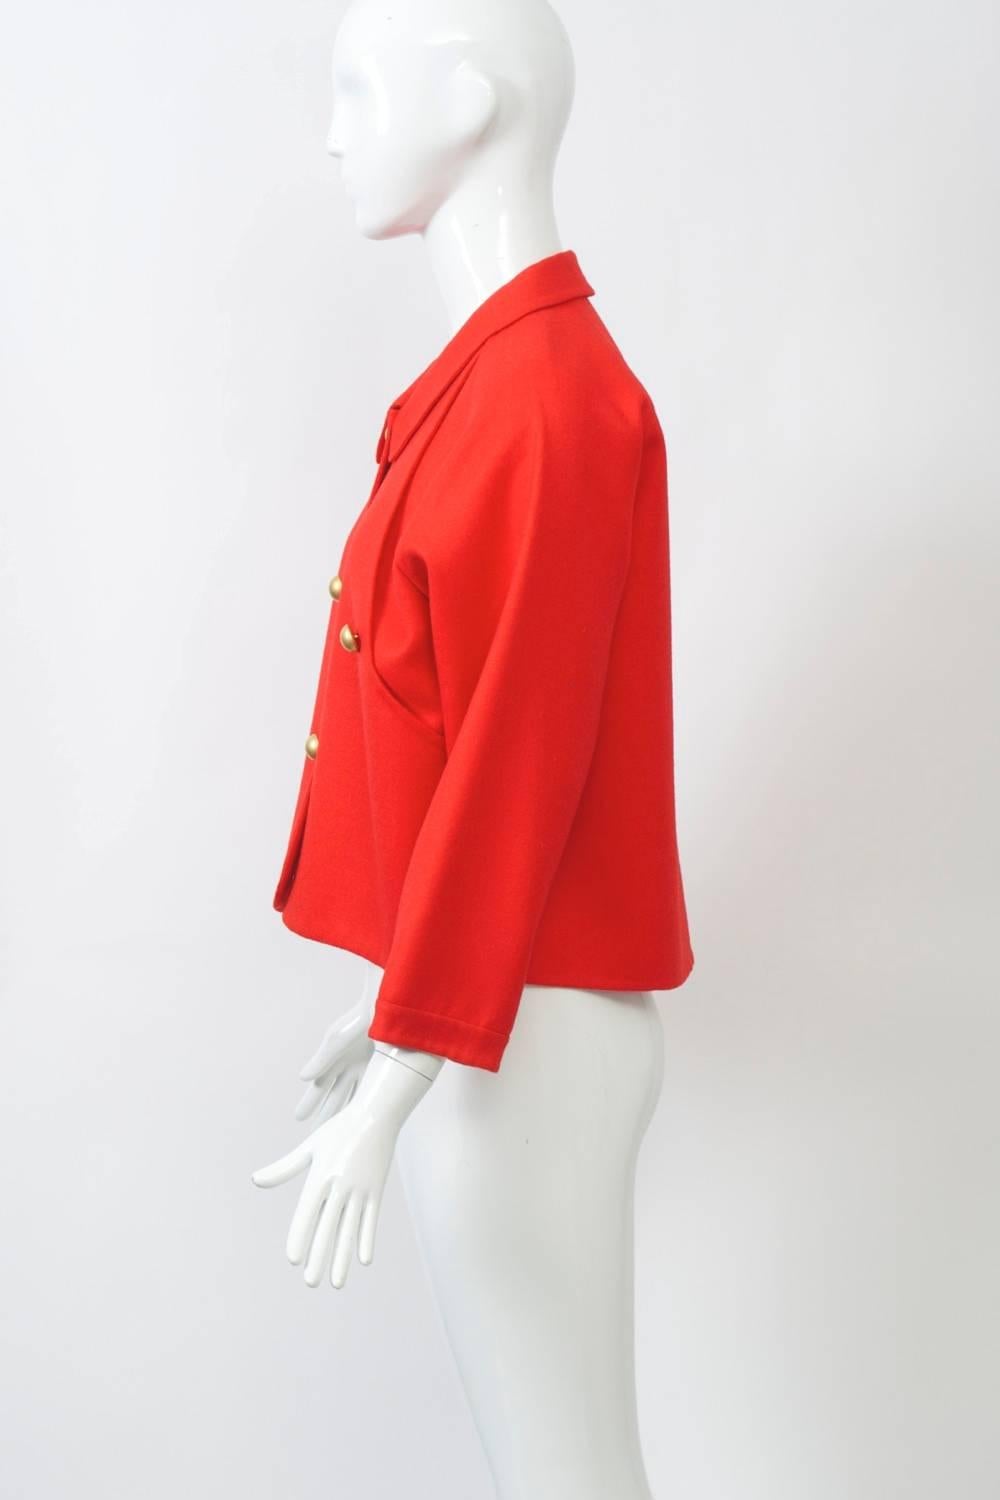 Geoffrey Beene c.1980s double-sided wool jacket in orangey red featuring over panels in front shaped around armholes. Loose fitting, boxy shape with raglan sleeves, small collar, and matte gold buttons at front and closing panels/pockets.